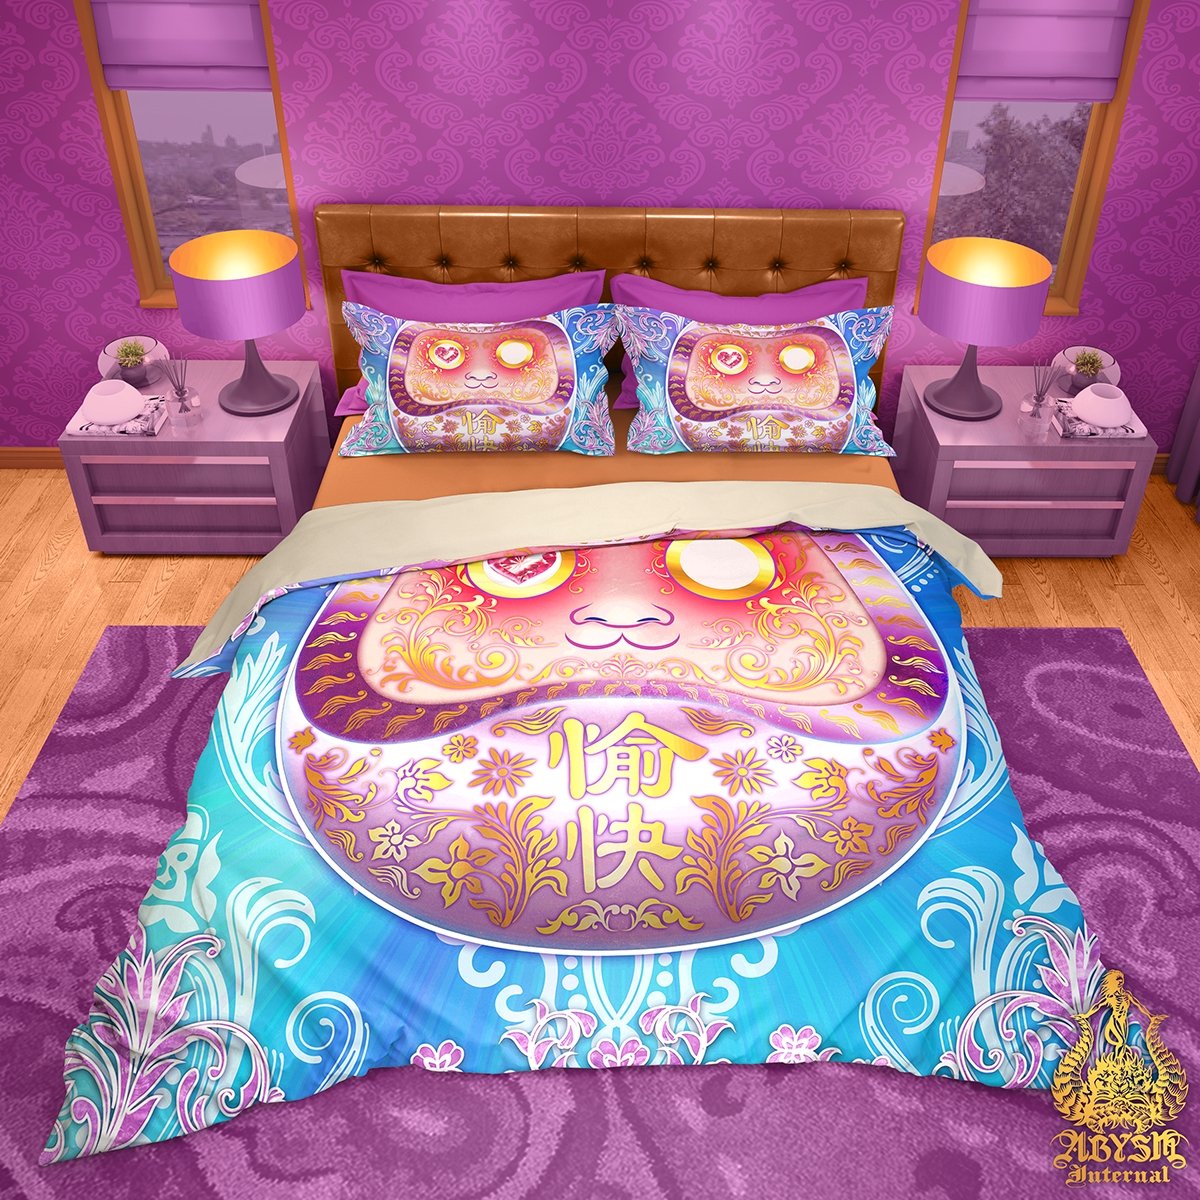 Kawaii Bedding Set, Comforter and Duvet, Aesthetic Bed Cover, Kawaii Gamer Bedroom Decor, King, Queen and Twin Size - Pastel Daruma - Abysm Internal